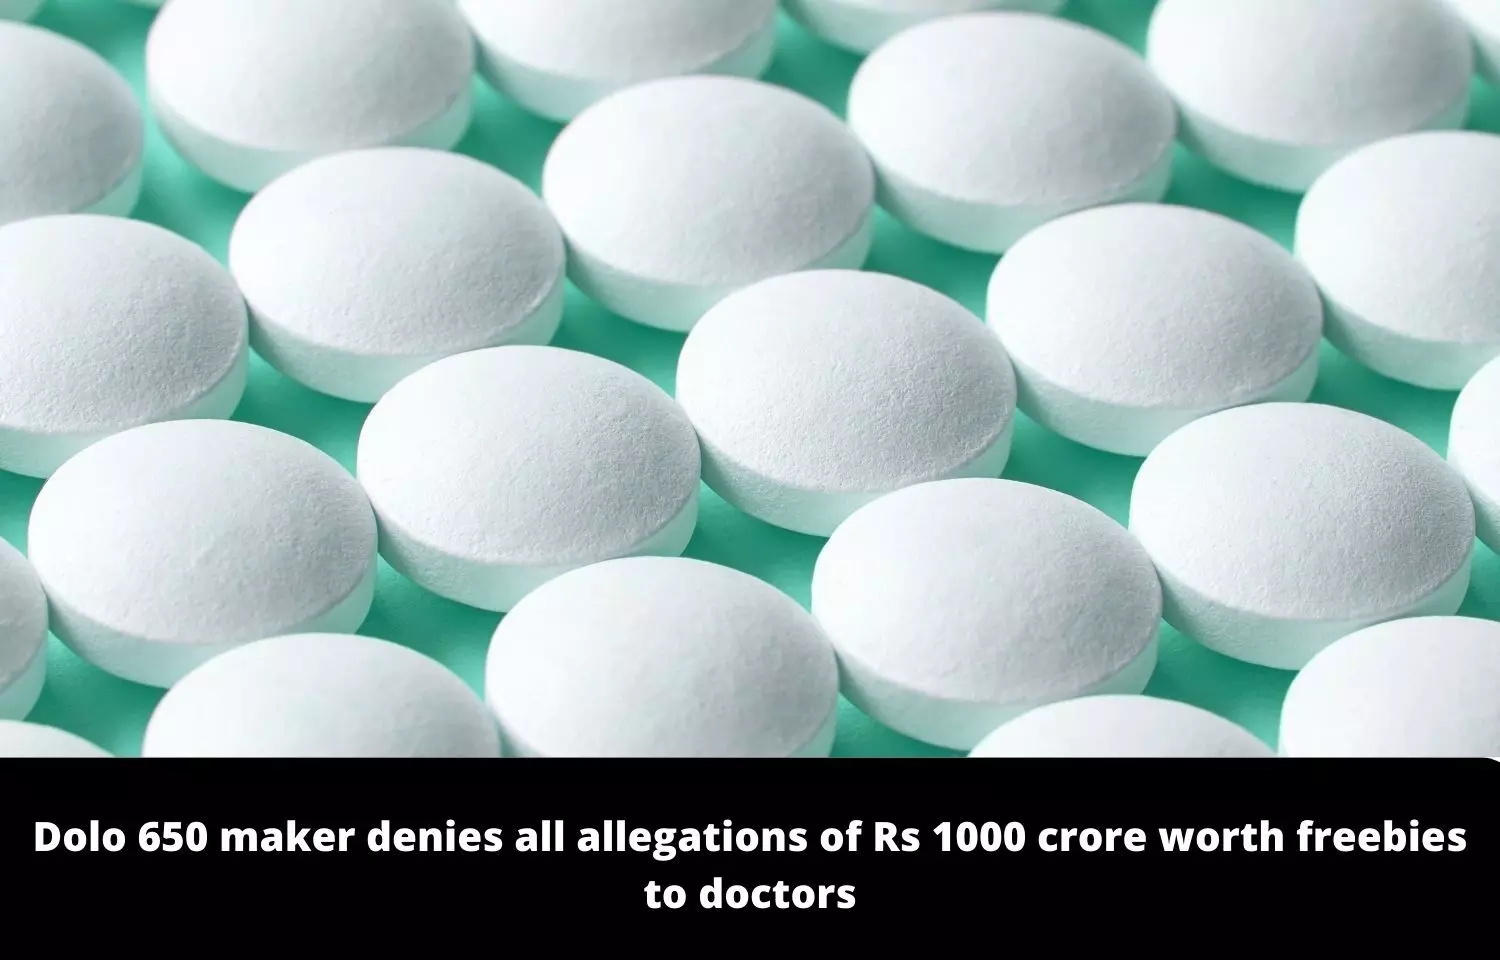 Not possible: Dolo 650 maker Micro Labs denies all allegations of Rs 1000 crore worth freebies to doctors